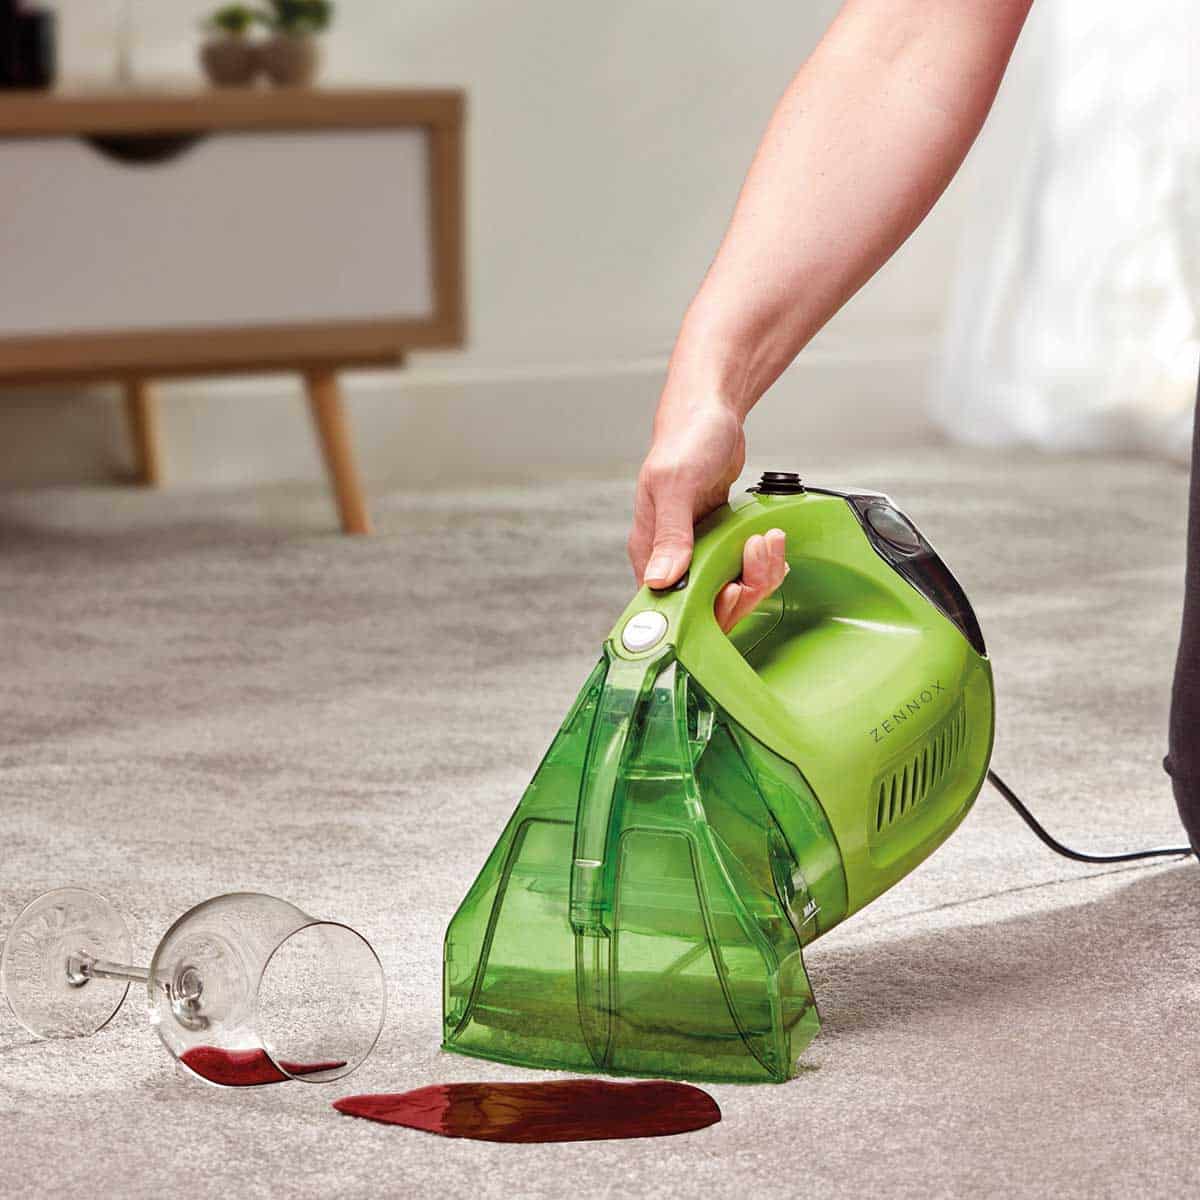 Zennox Handheld Electric Carpet & Upholstery Washer in Green 